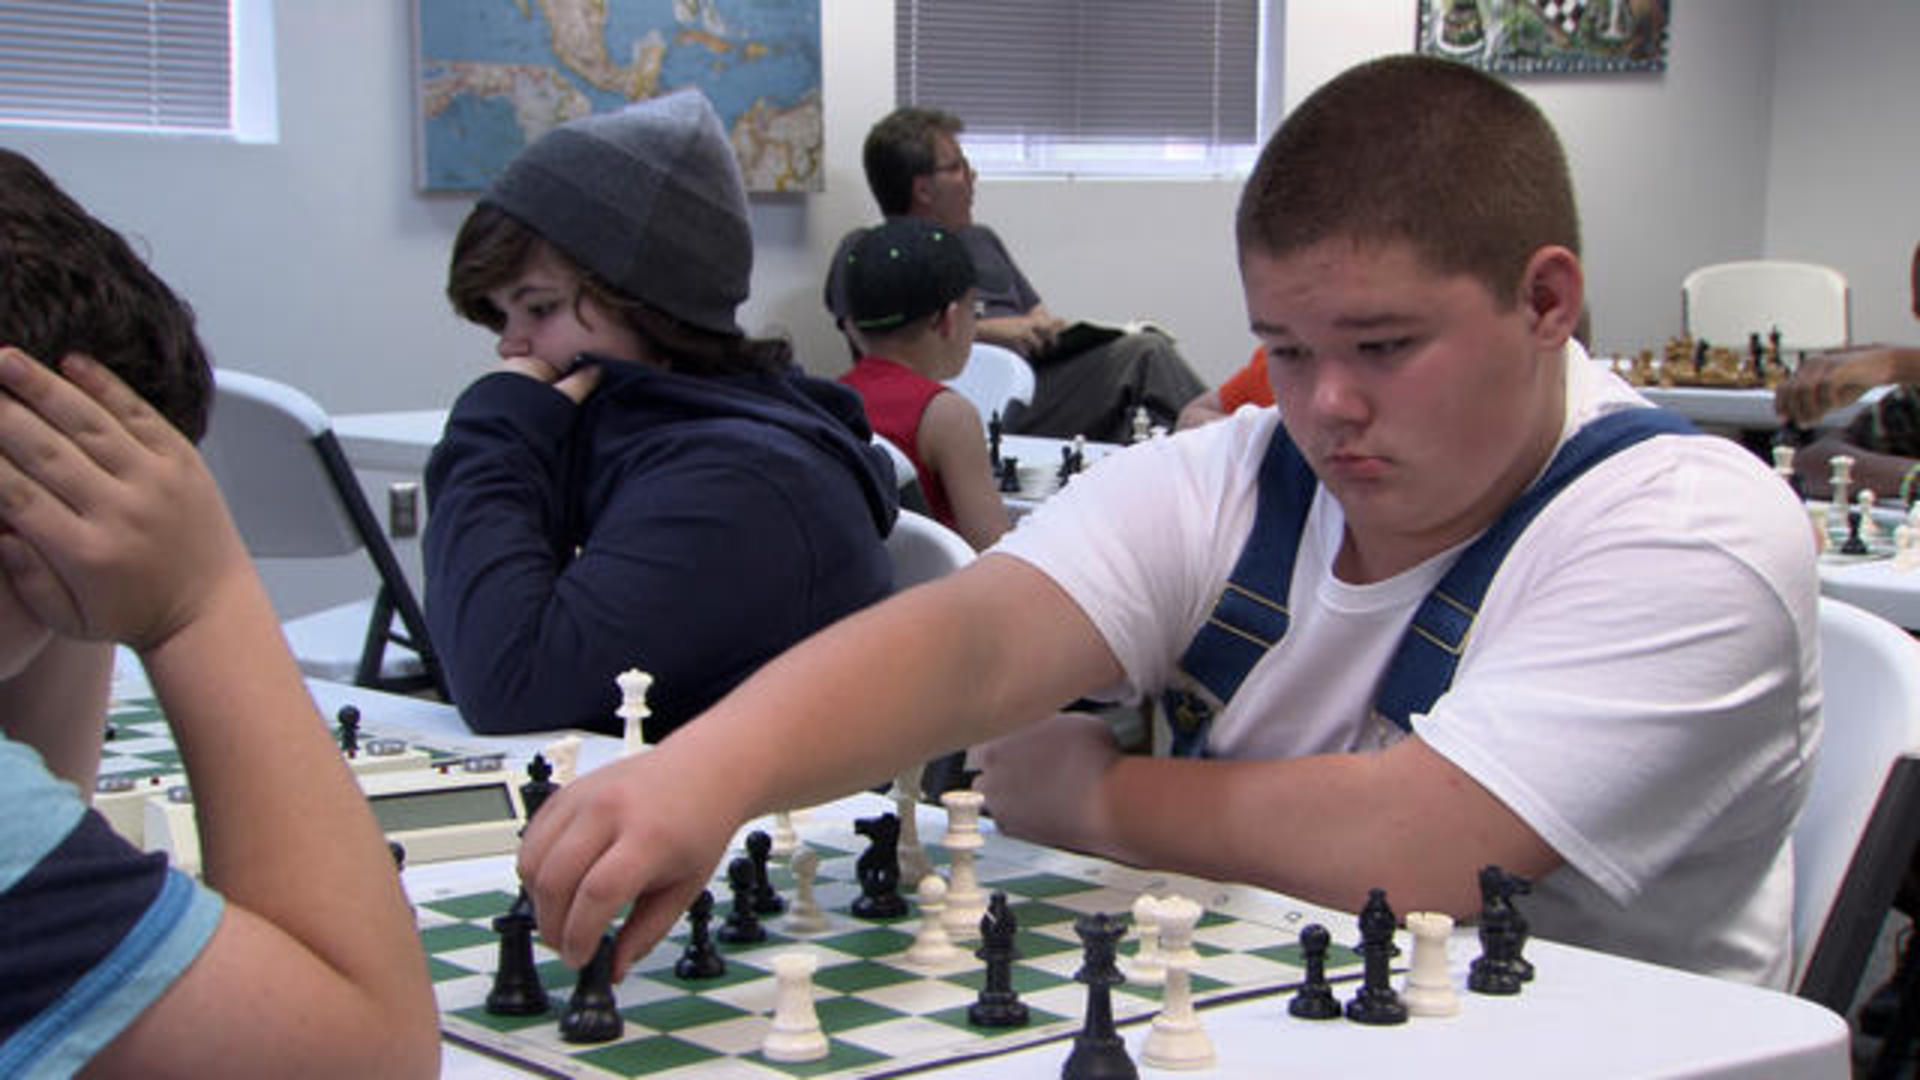 Online chess makes its biggest move - CBS News